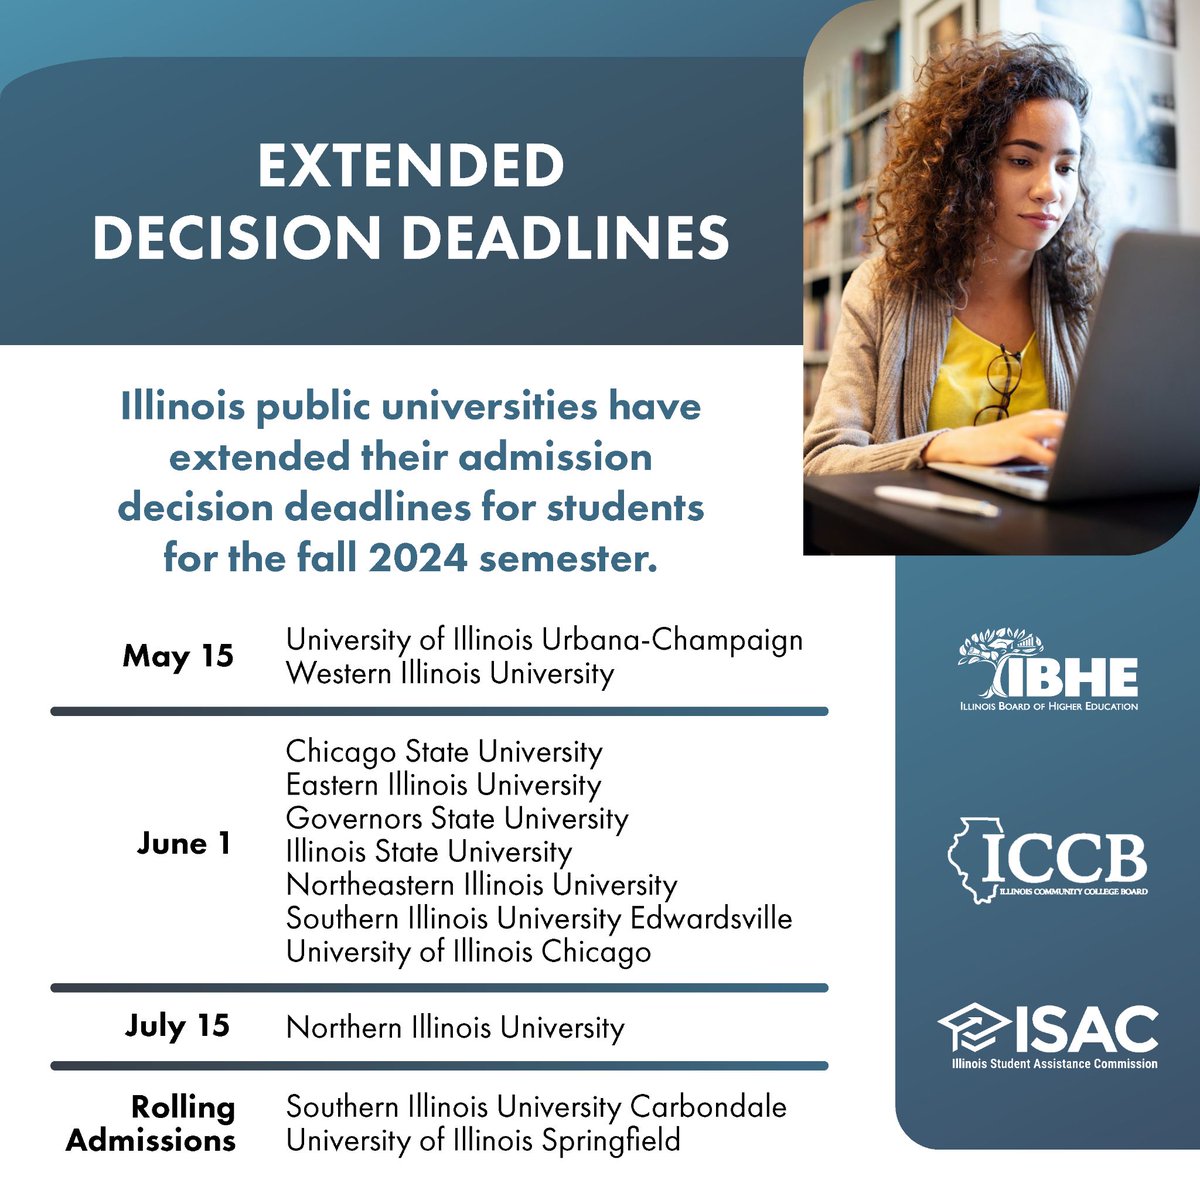 Students still have time to commit to an Illinois university for fall 2024! High school seniors who did not complete a FAFSA or Alt App should complete this brief form at isac.org/connect. @ISACFinAid will be in touch to help with financial aid apps.